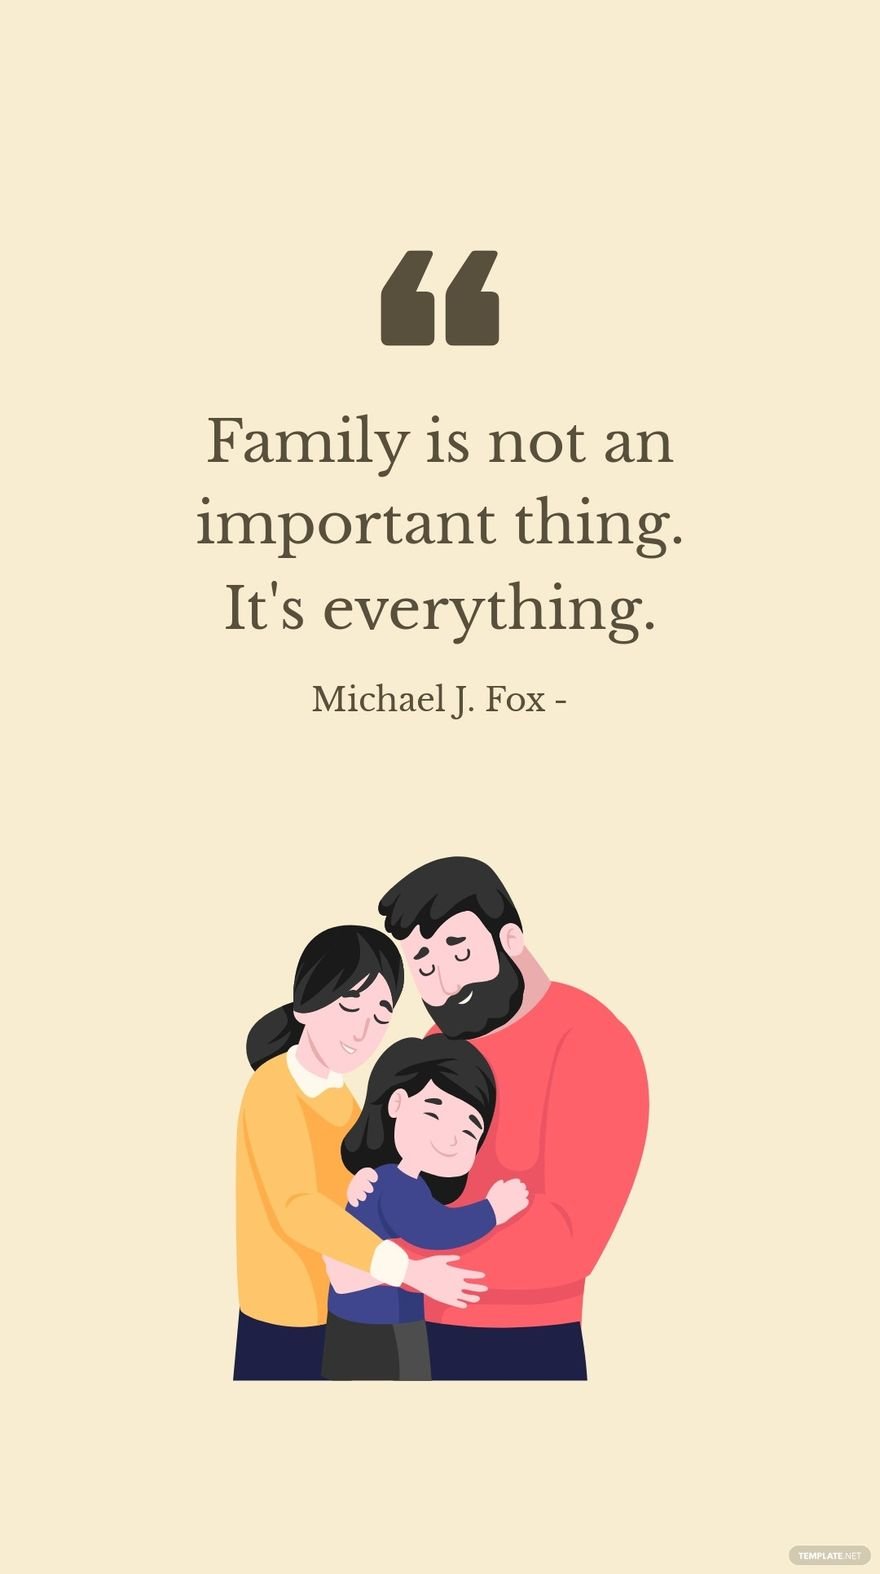 Michael J. Fox - Family is not an important thing. It's everything.